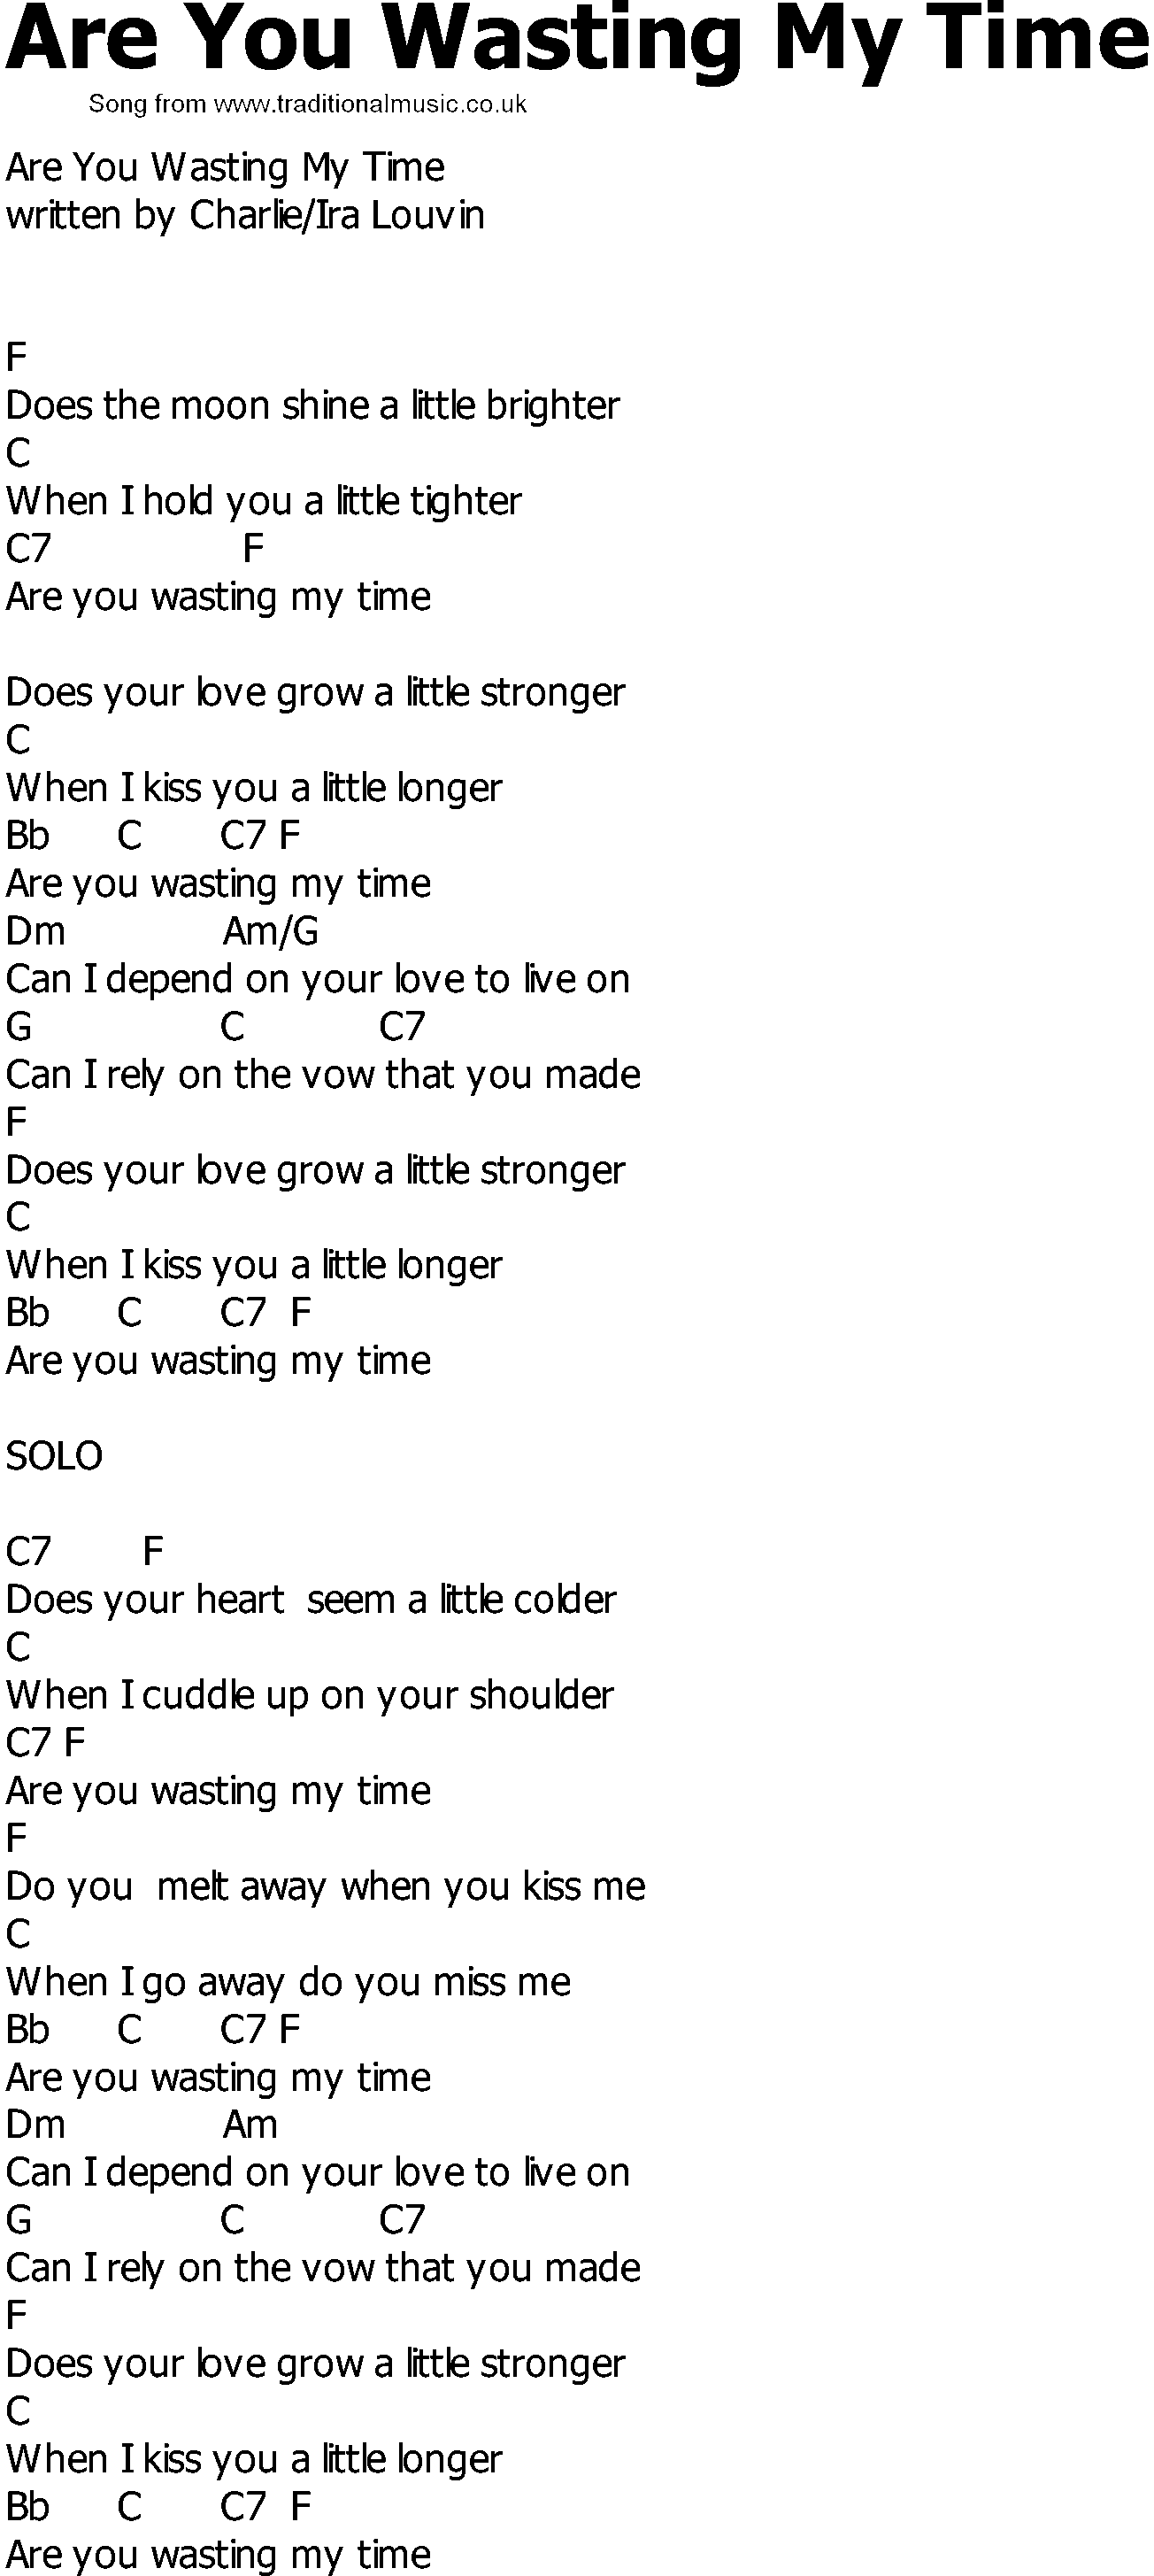 Old Country song lyrics with chords - Are You Wasting My Time